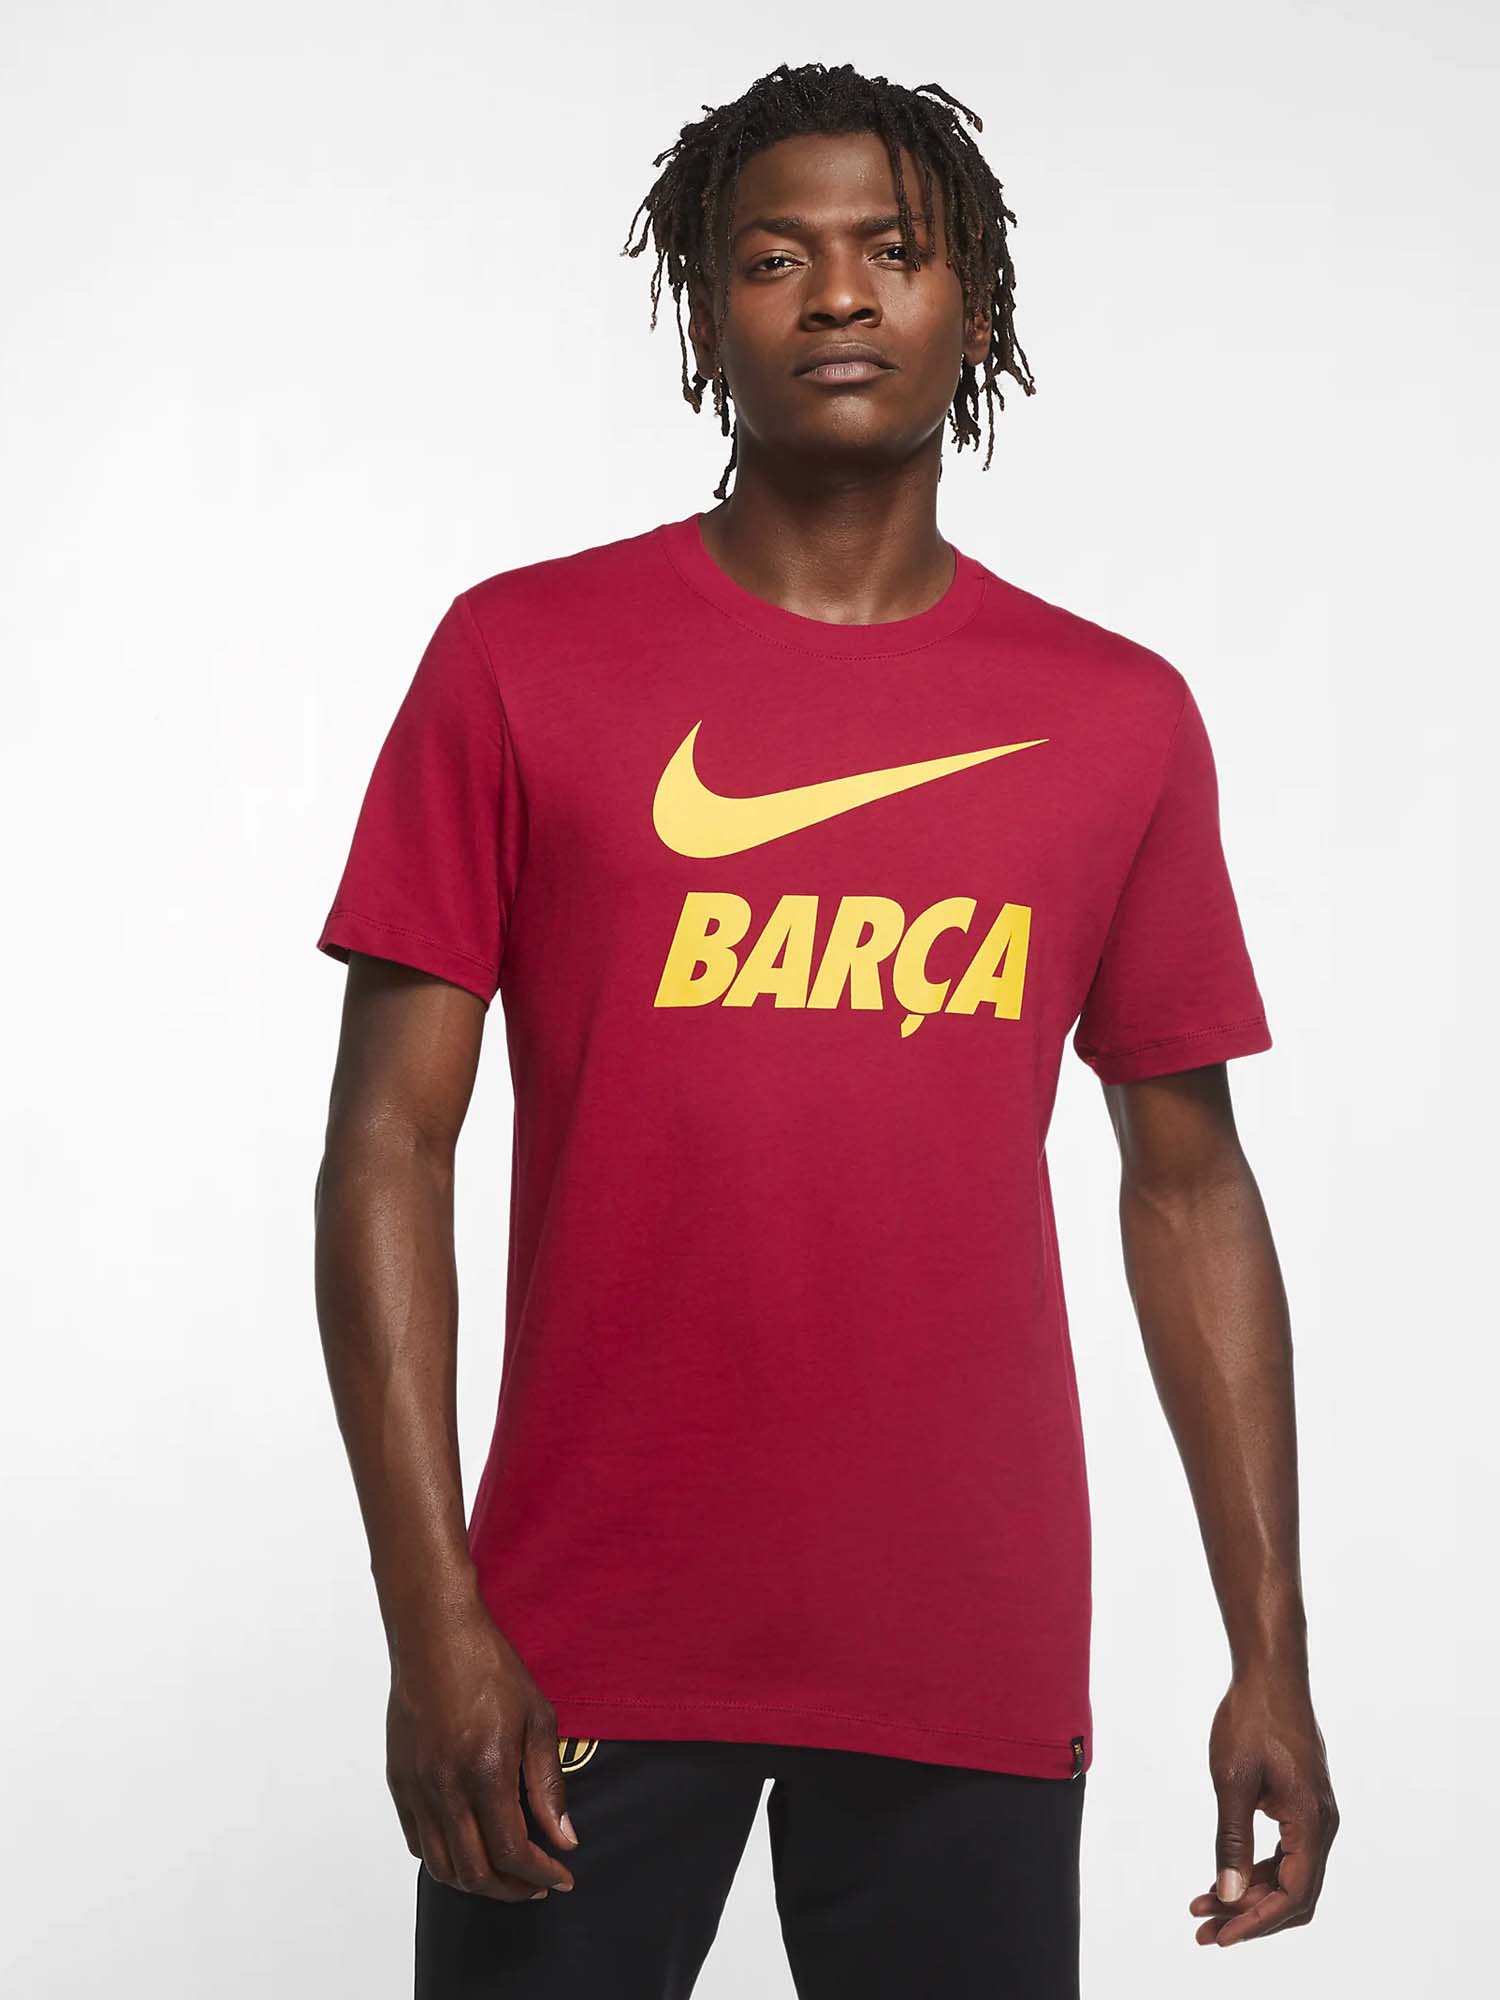 Fc Barcelona Training Collection portrait soccerbible 20 21_0002_Layer 32.jpg